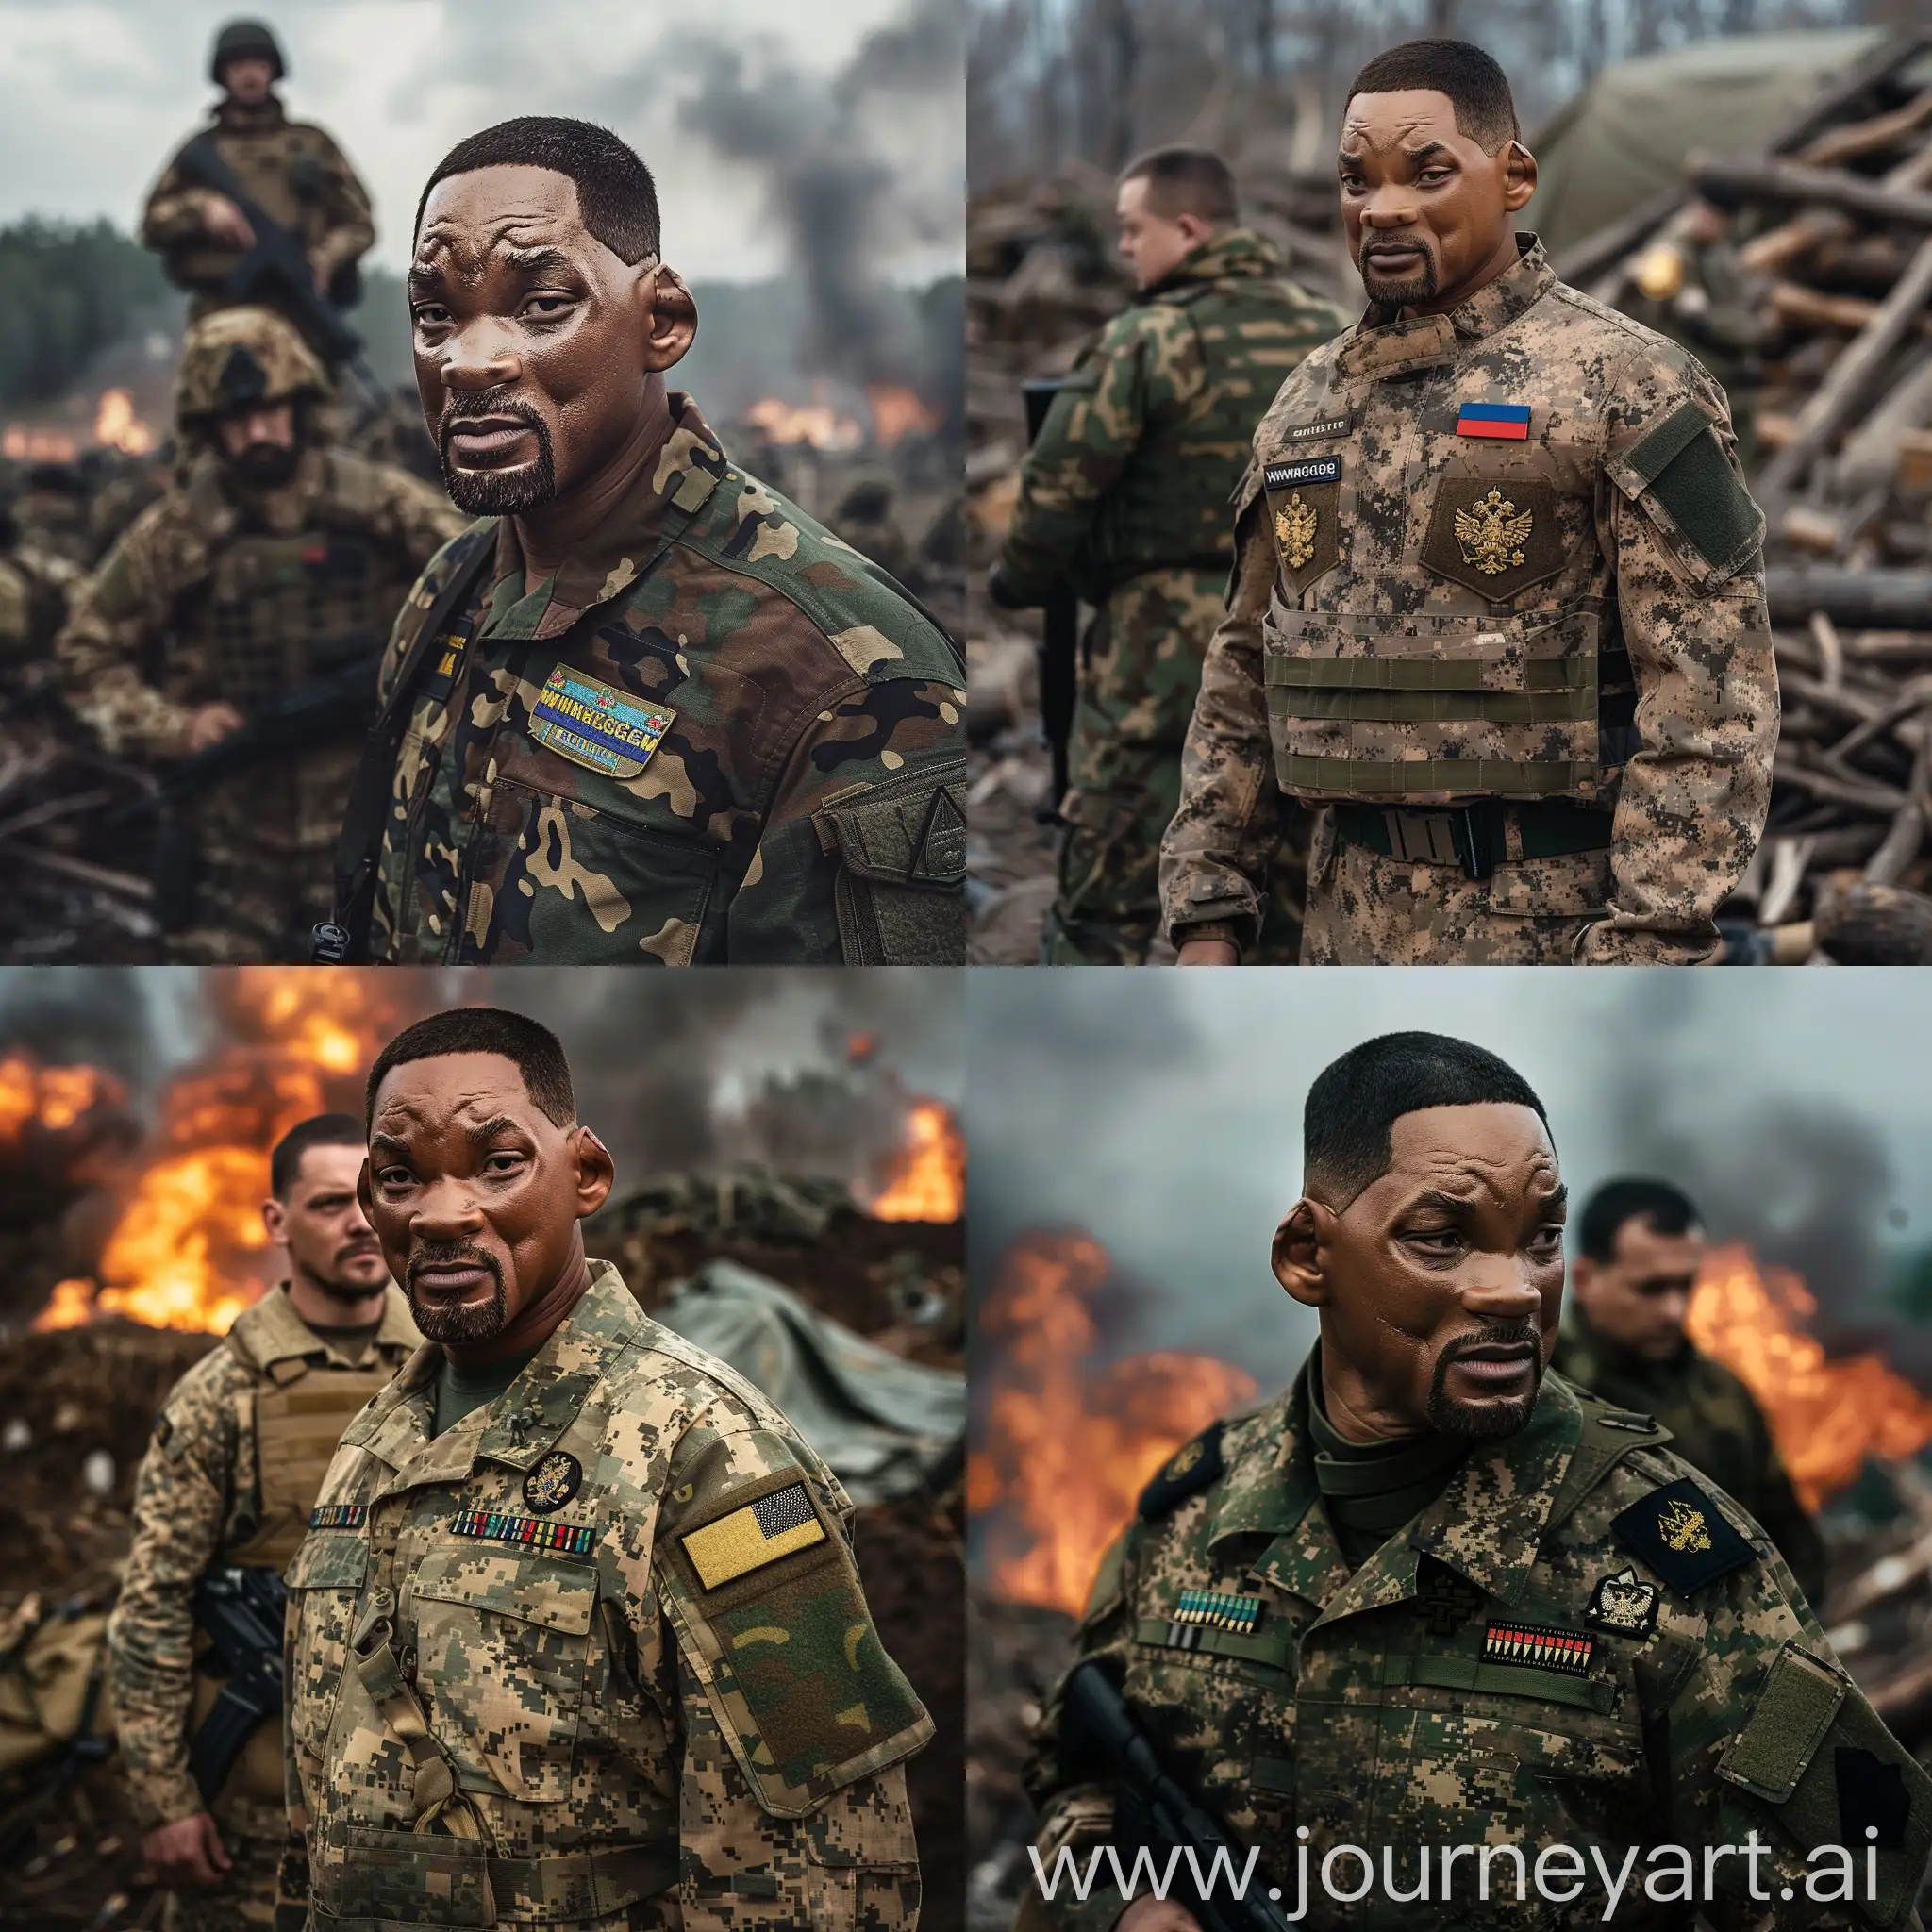 Will-Smith-in-Military-Uniform-at-Special-Operation-in-Ukraine-with-Prigozhin-Amidst-Fierce-Battles